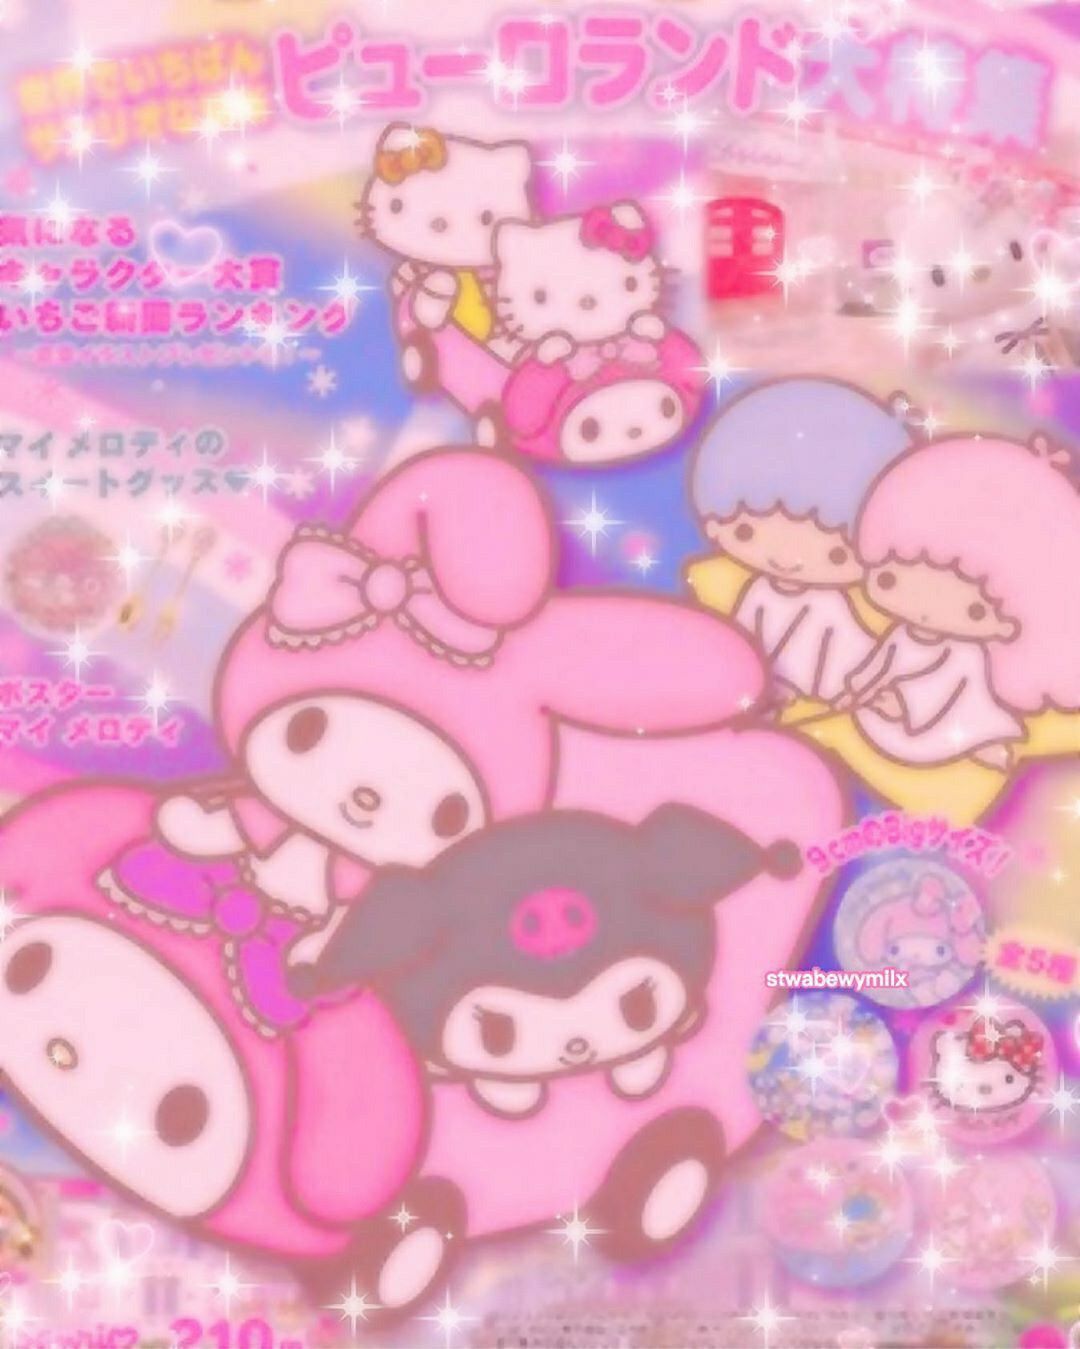 A poster for the hello kitty movie - Sanrio